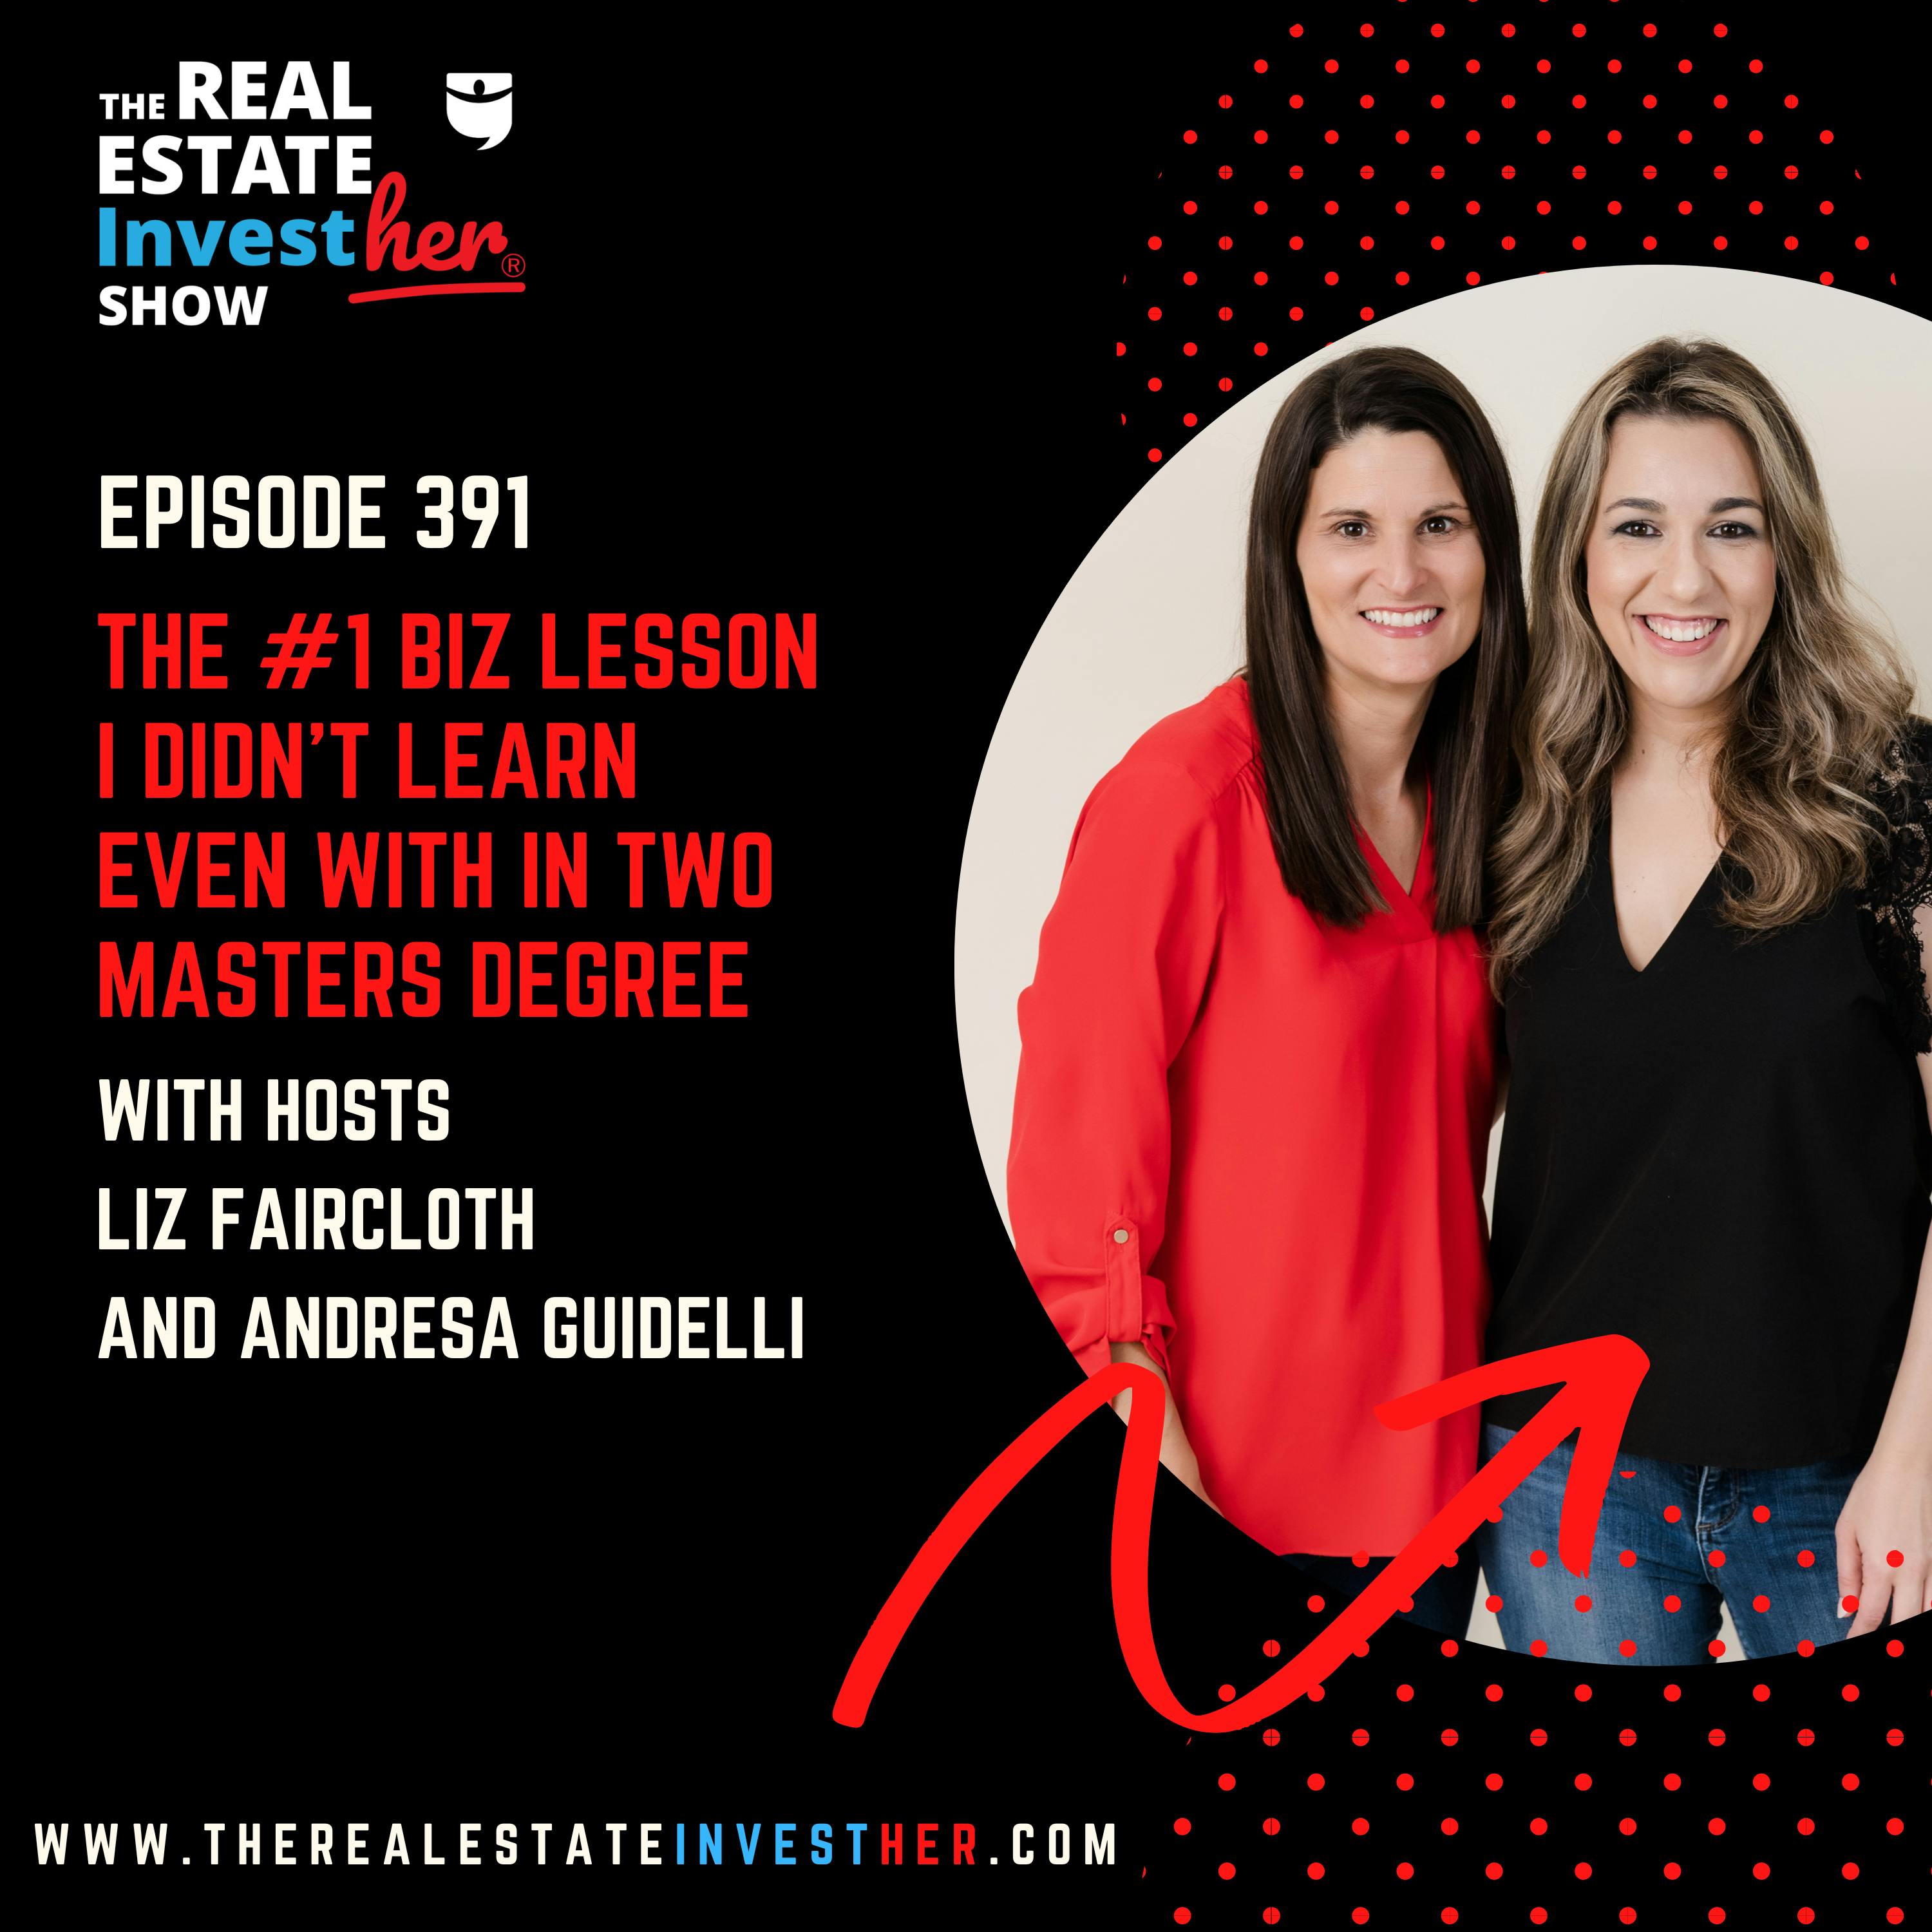 The #1 Biz Lesson I Didn’t Learn Even With in Two Masters Degrees (Minisode)